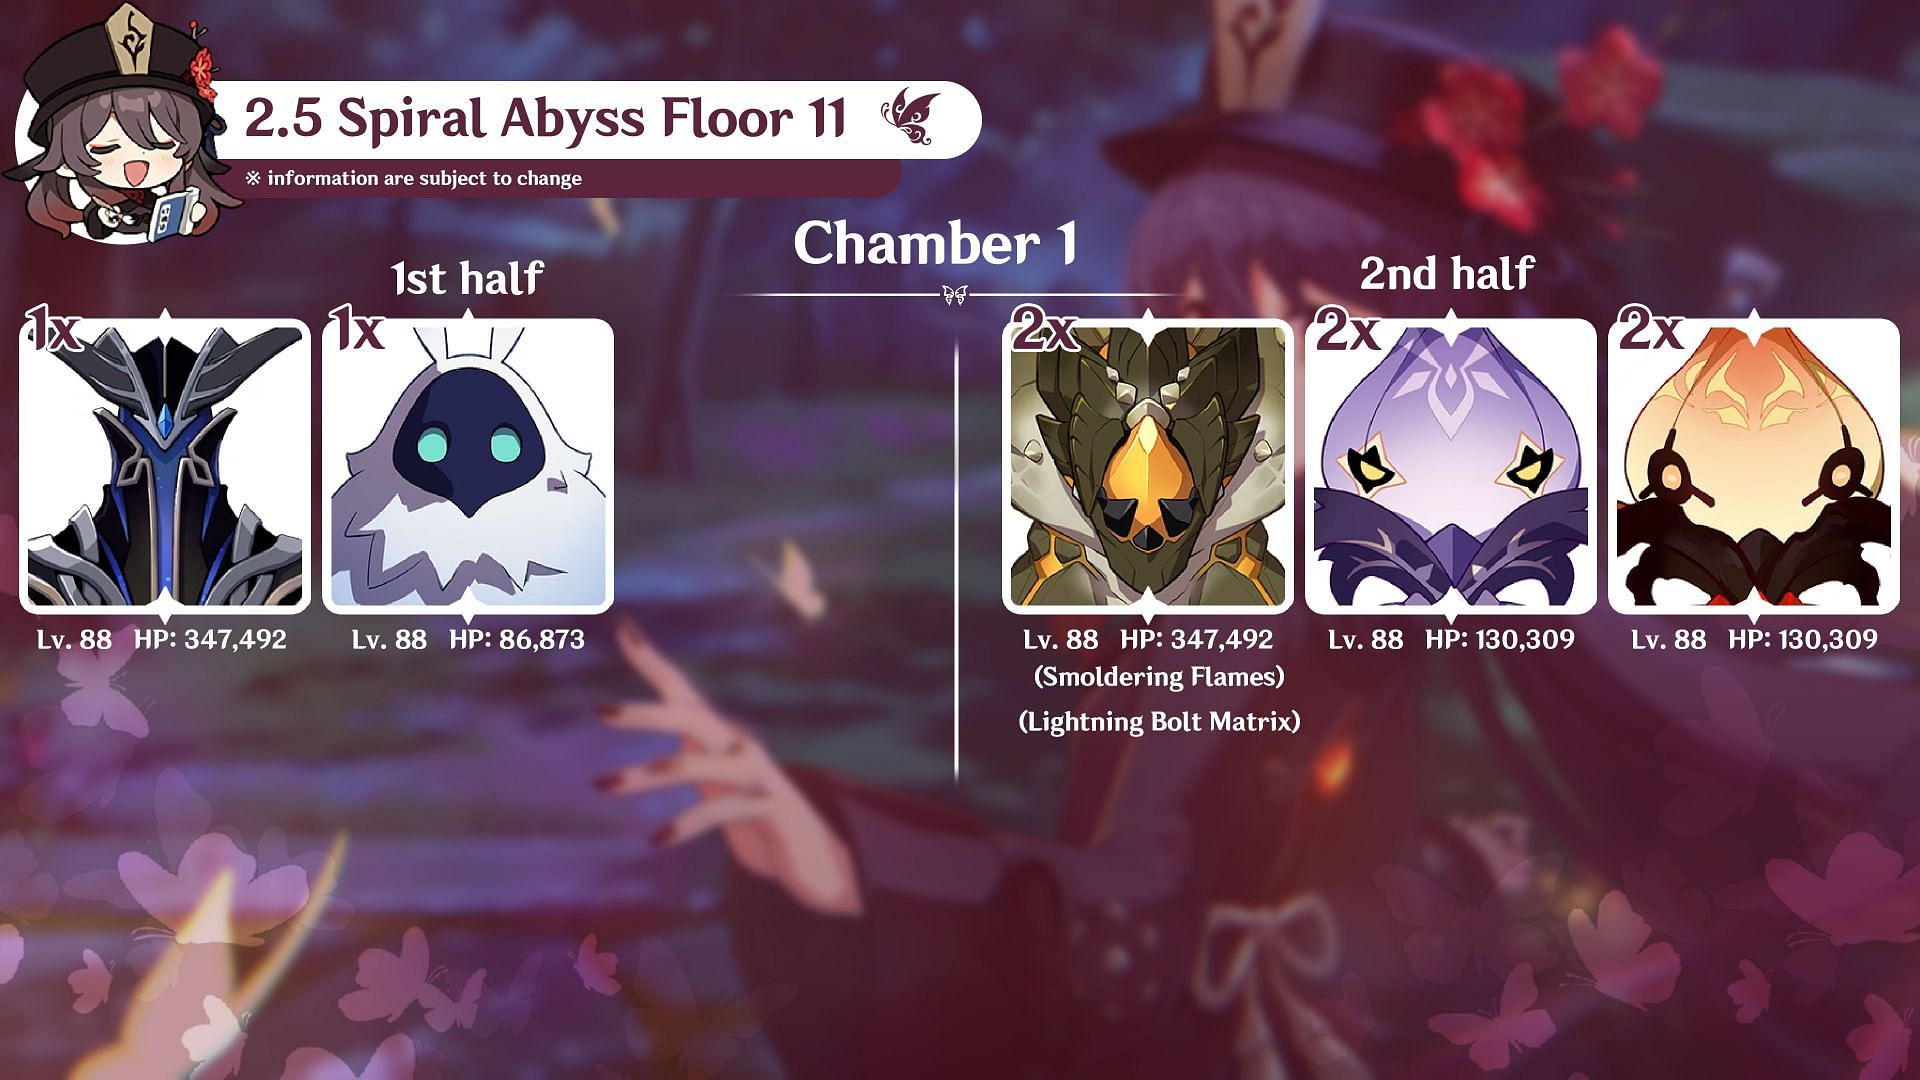 Floor 11, Chamber 1 of the upcoming Spiral Abyss (Image via Wangsheng Funeral Parlor Discord)